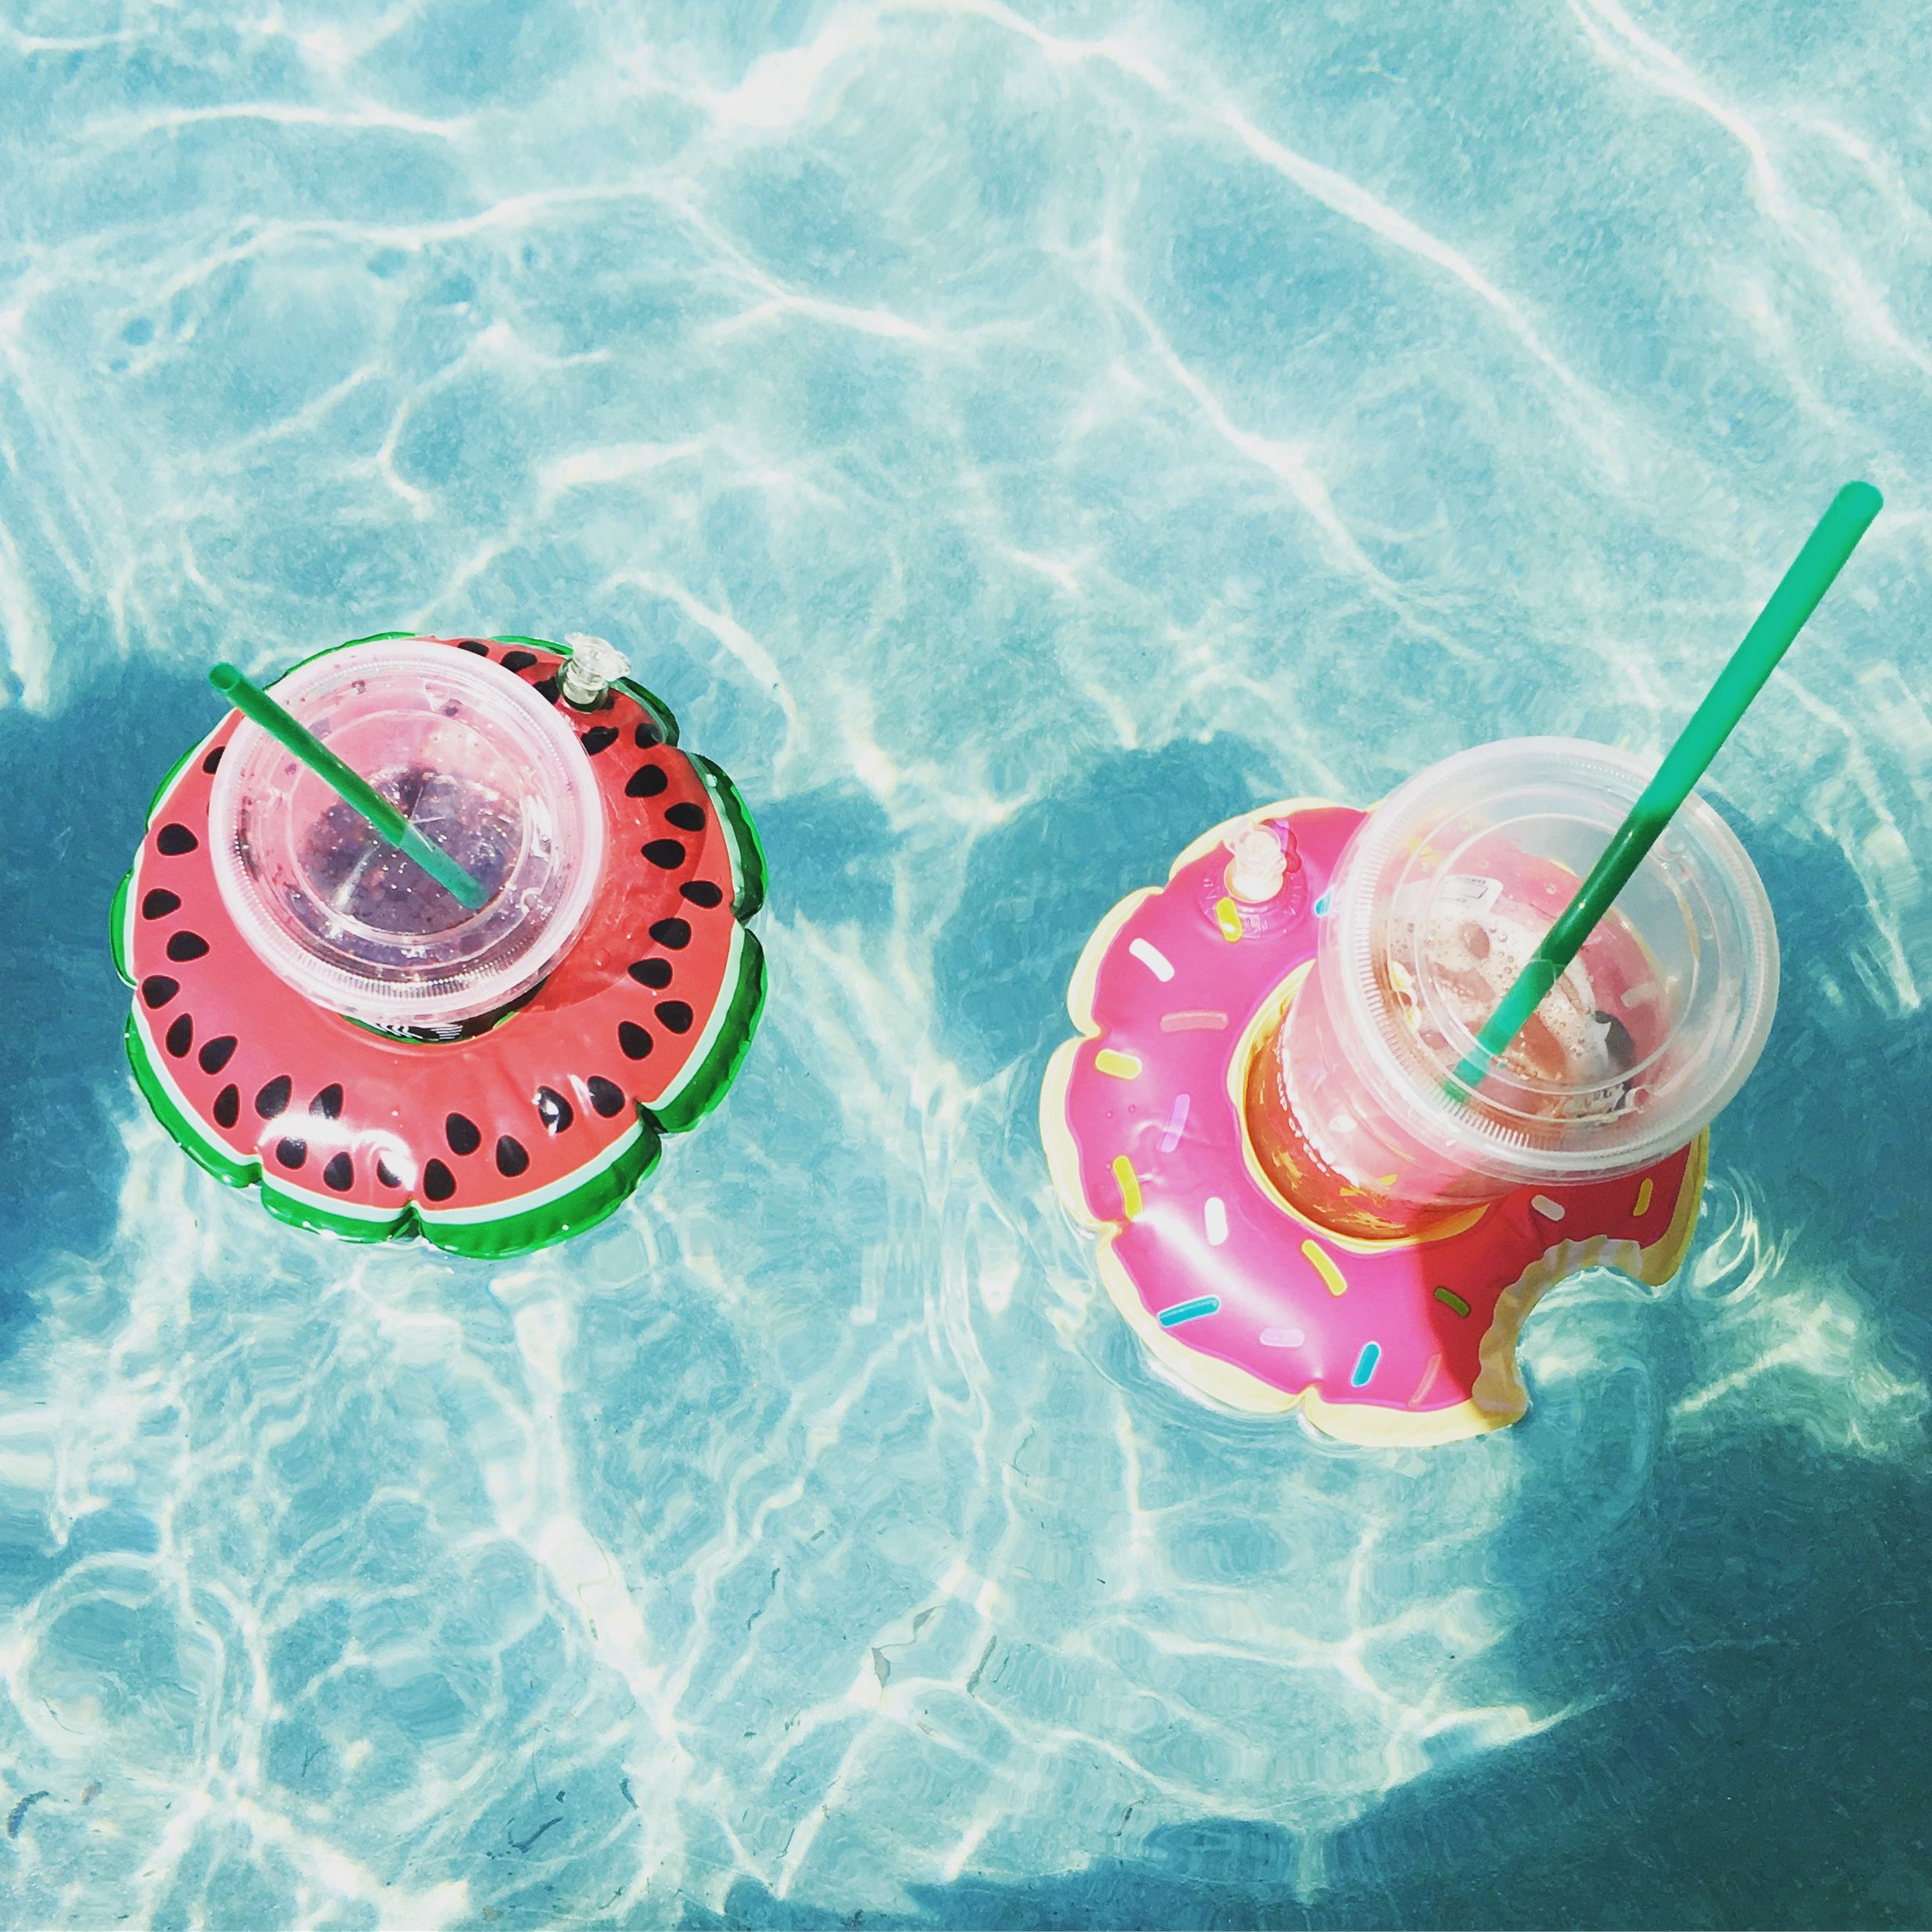 Palm Springs Bachelorette Party Ideas
 The drink floaties were essential on our Palm Springs